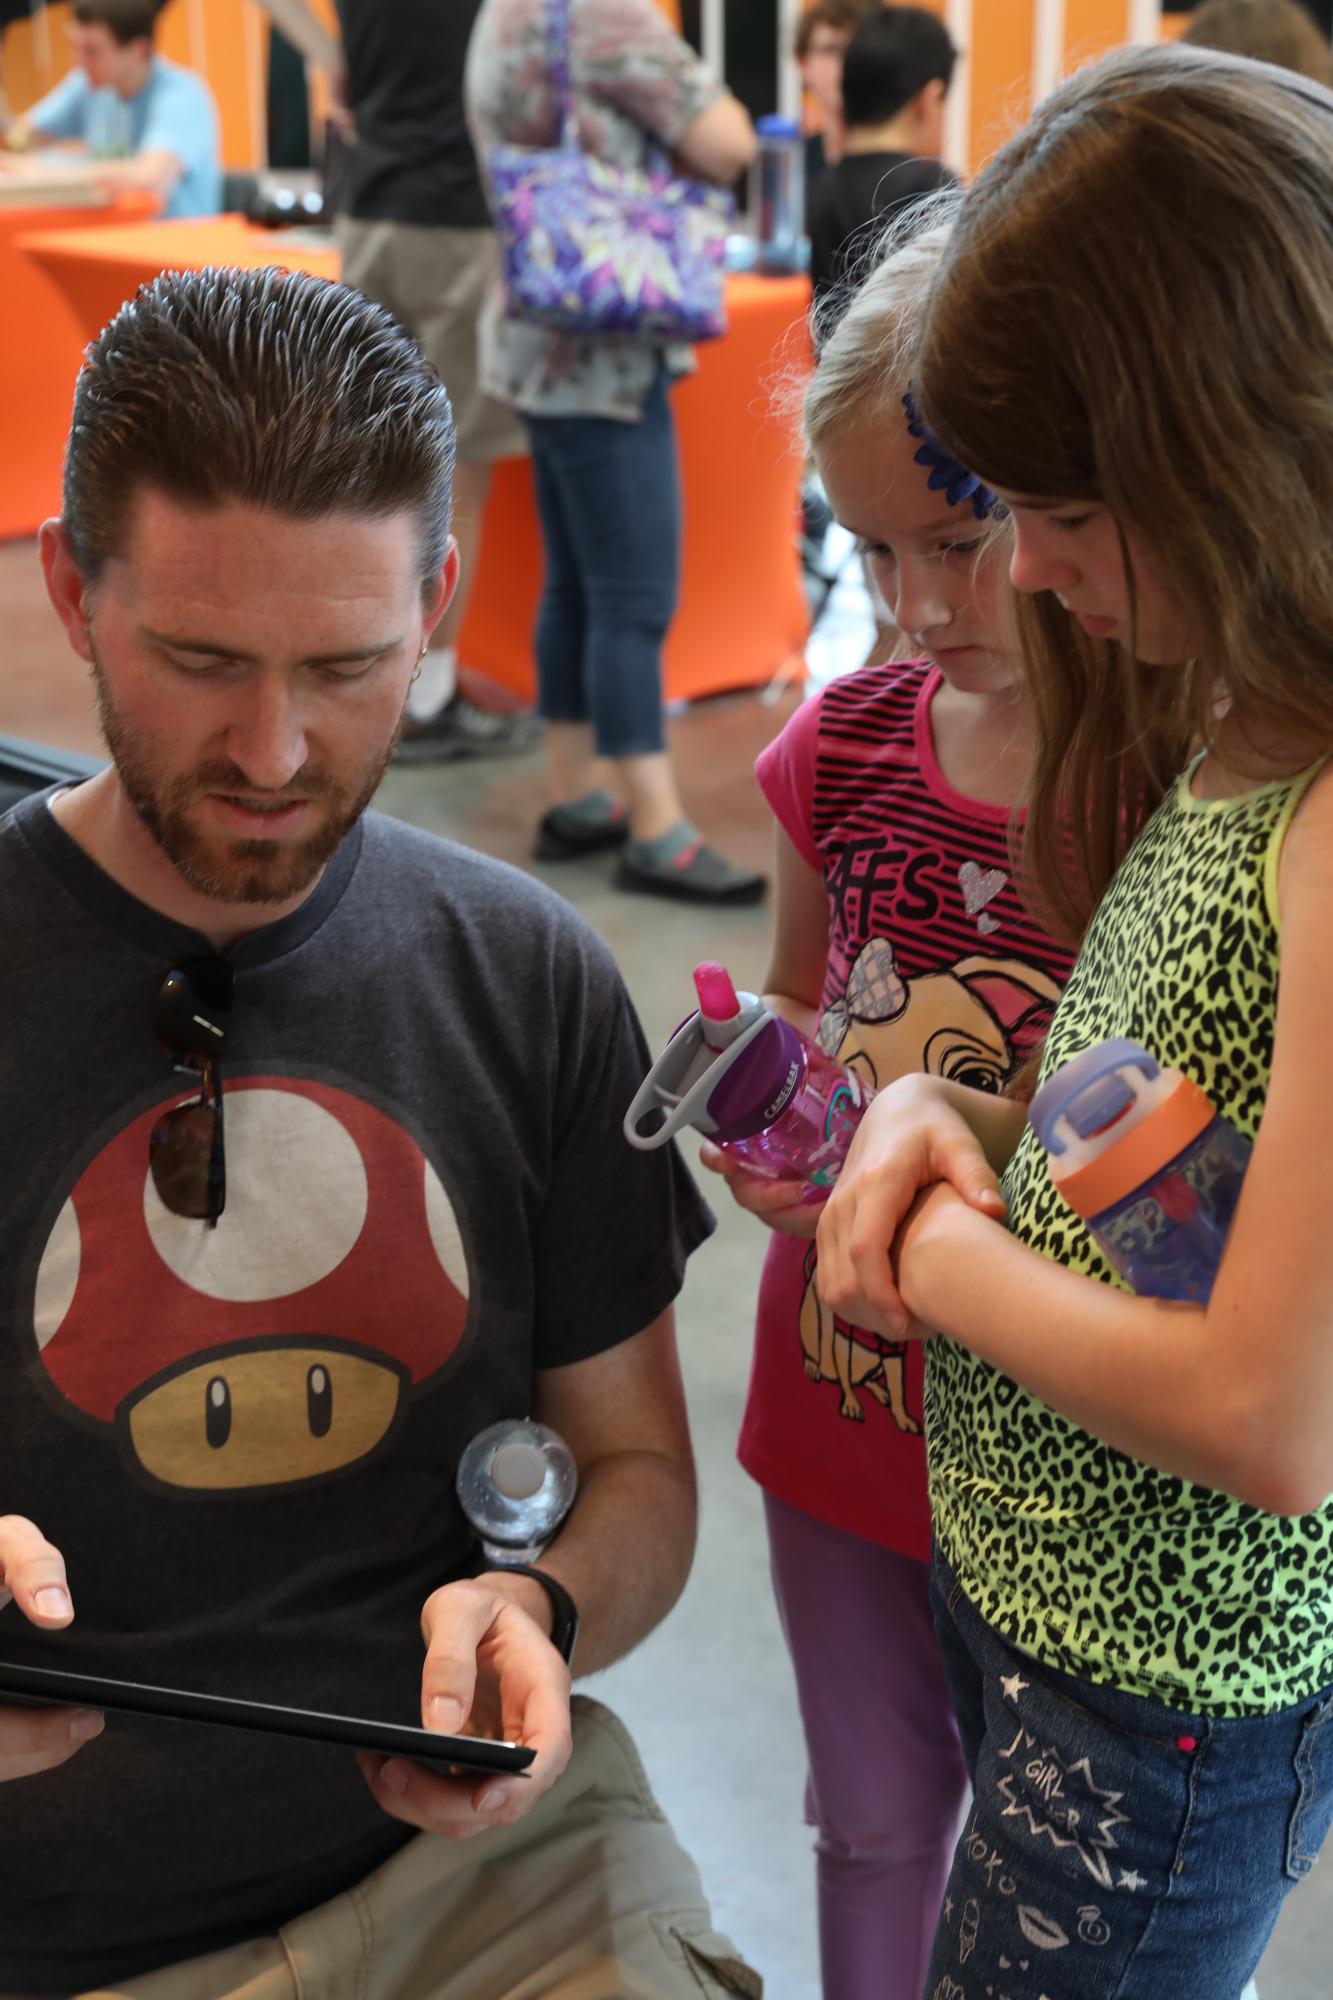 Matt Loachman, an RIT alumni, plays the video game, Crazy Platez, with his daughters Jaci (9) and Ada (6) at the Rochester Game Festival at the Gene Polisseni Center in Henrietta, N.Y. on Sept. 15, 2018. Photo by Cheyenne Boone